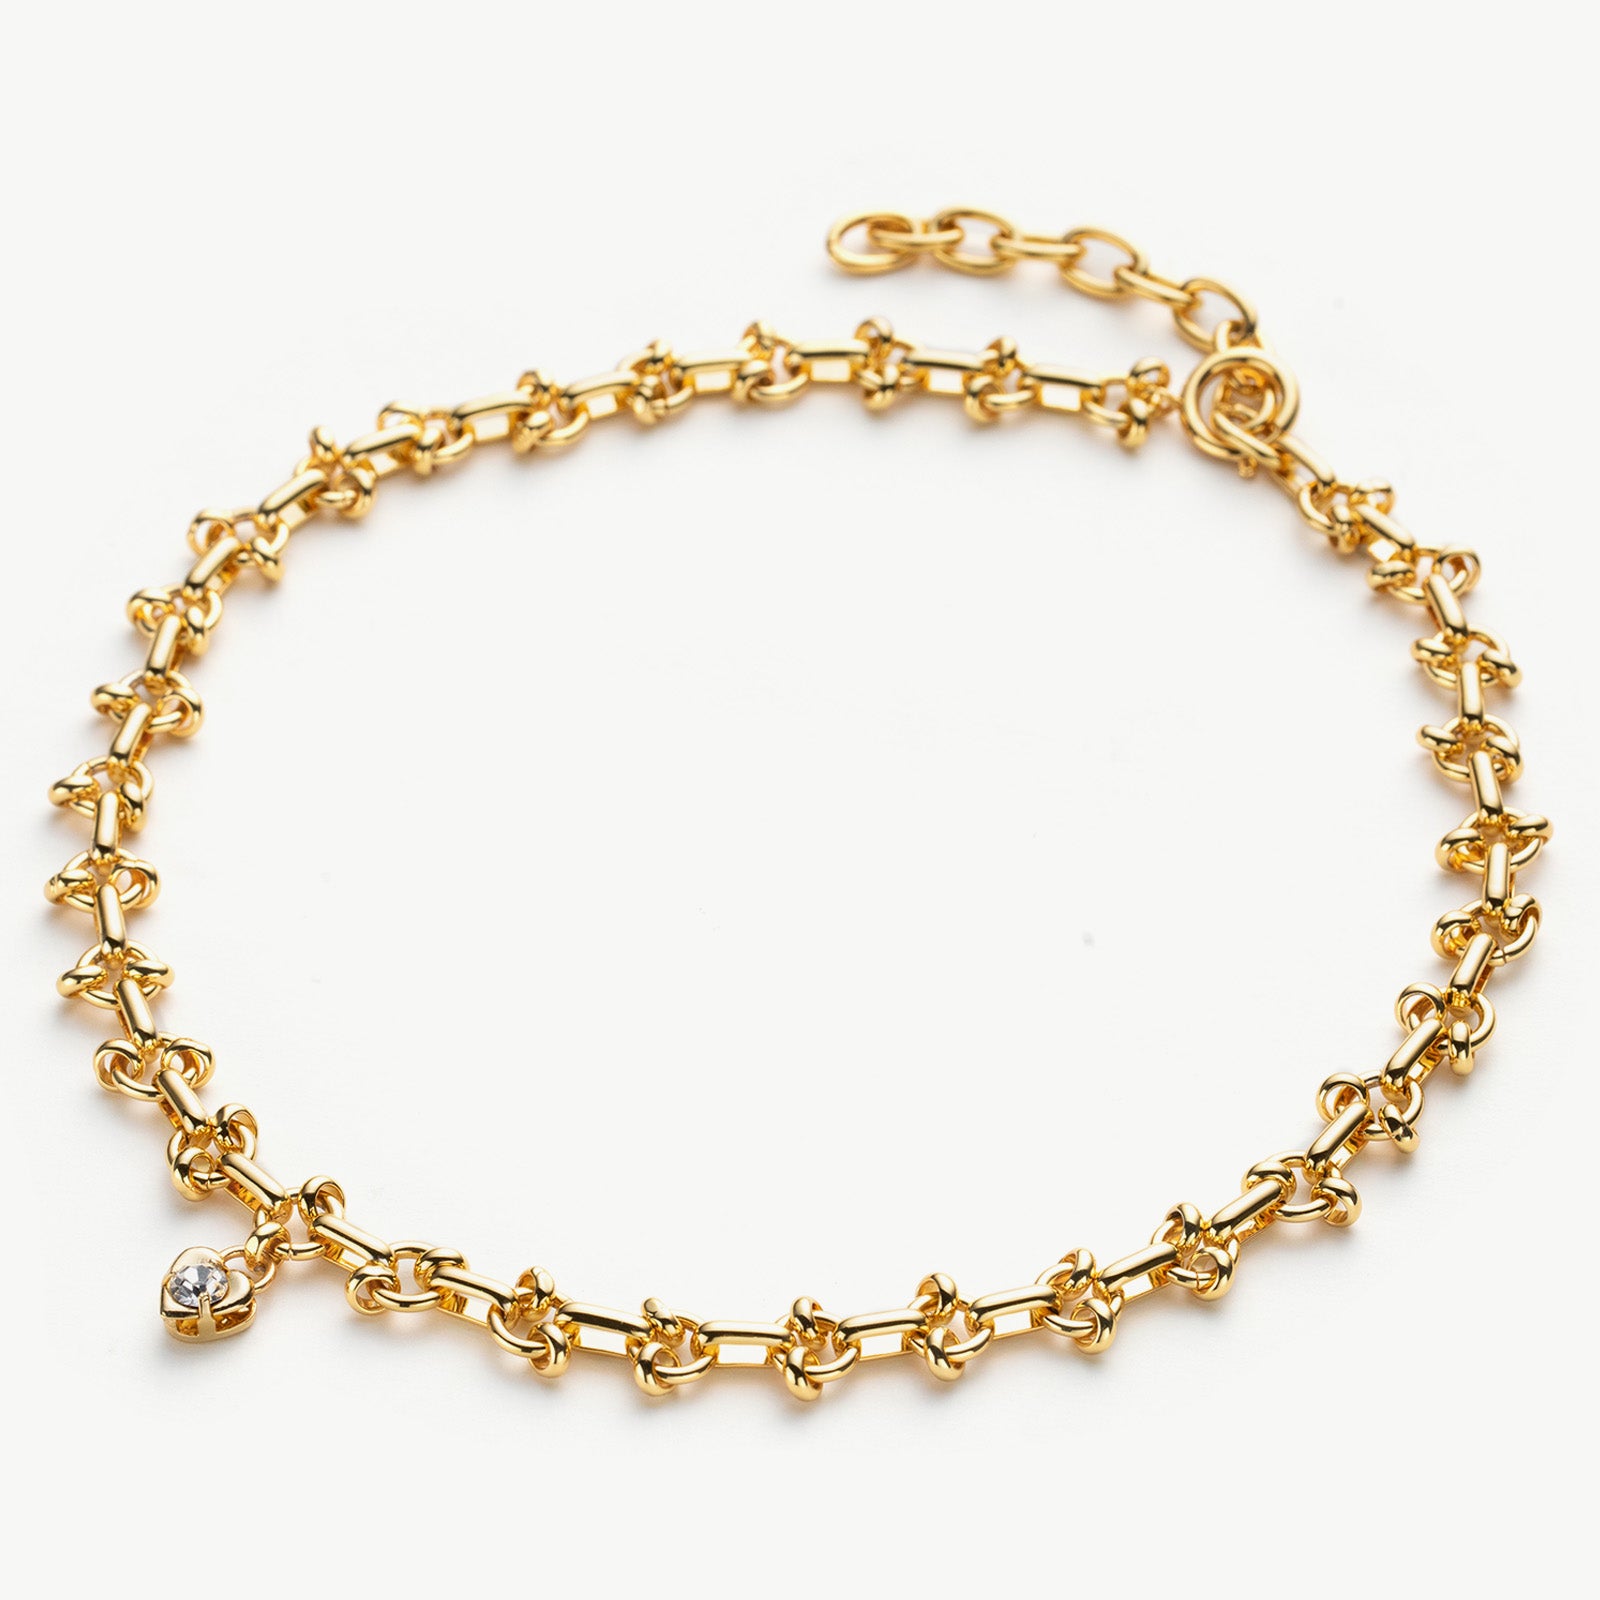  Heart Diamond Chain Necklace in Gold, a gilded embrace of love and luxury, this necklace features linked hearts adorned with diamonds, set in a radiant gold chain, making it a meaningful and stylish addition to your jewelry collection